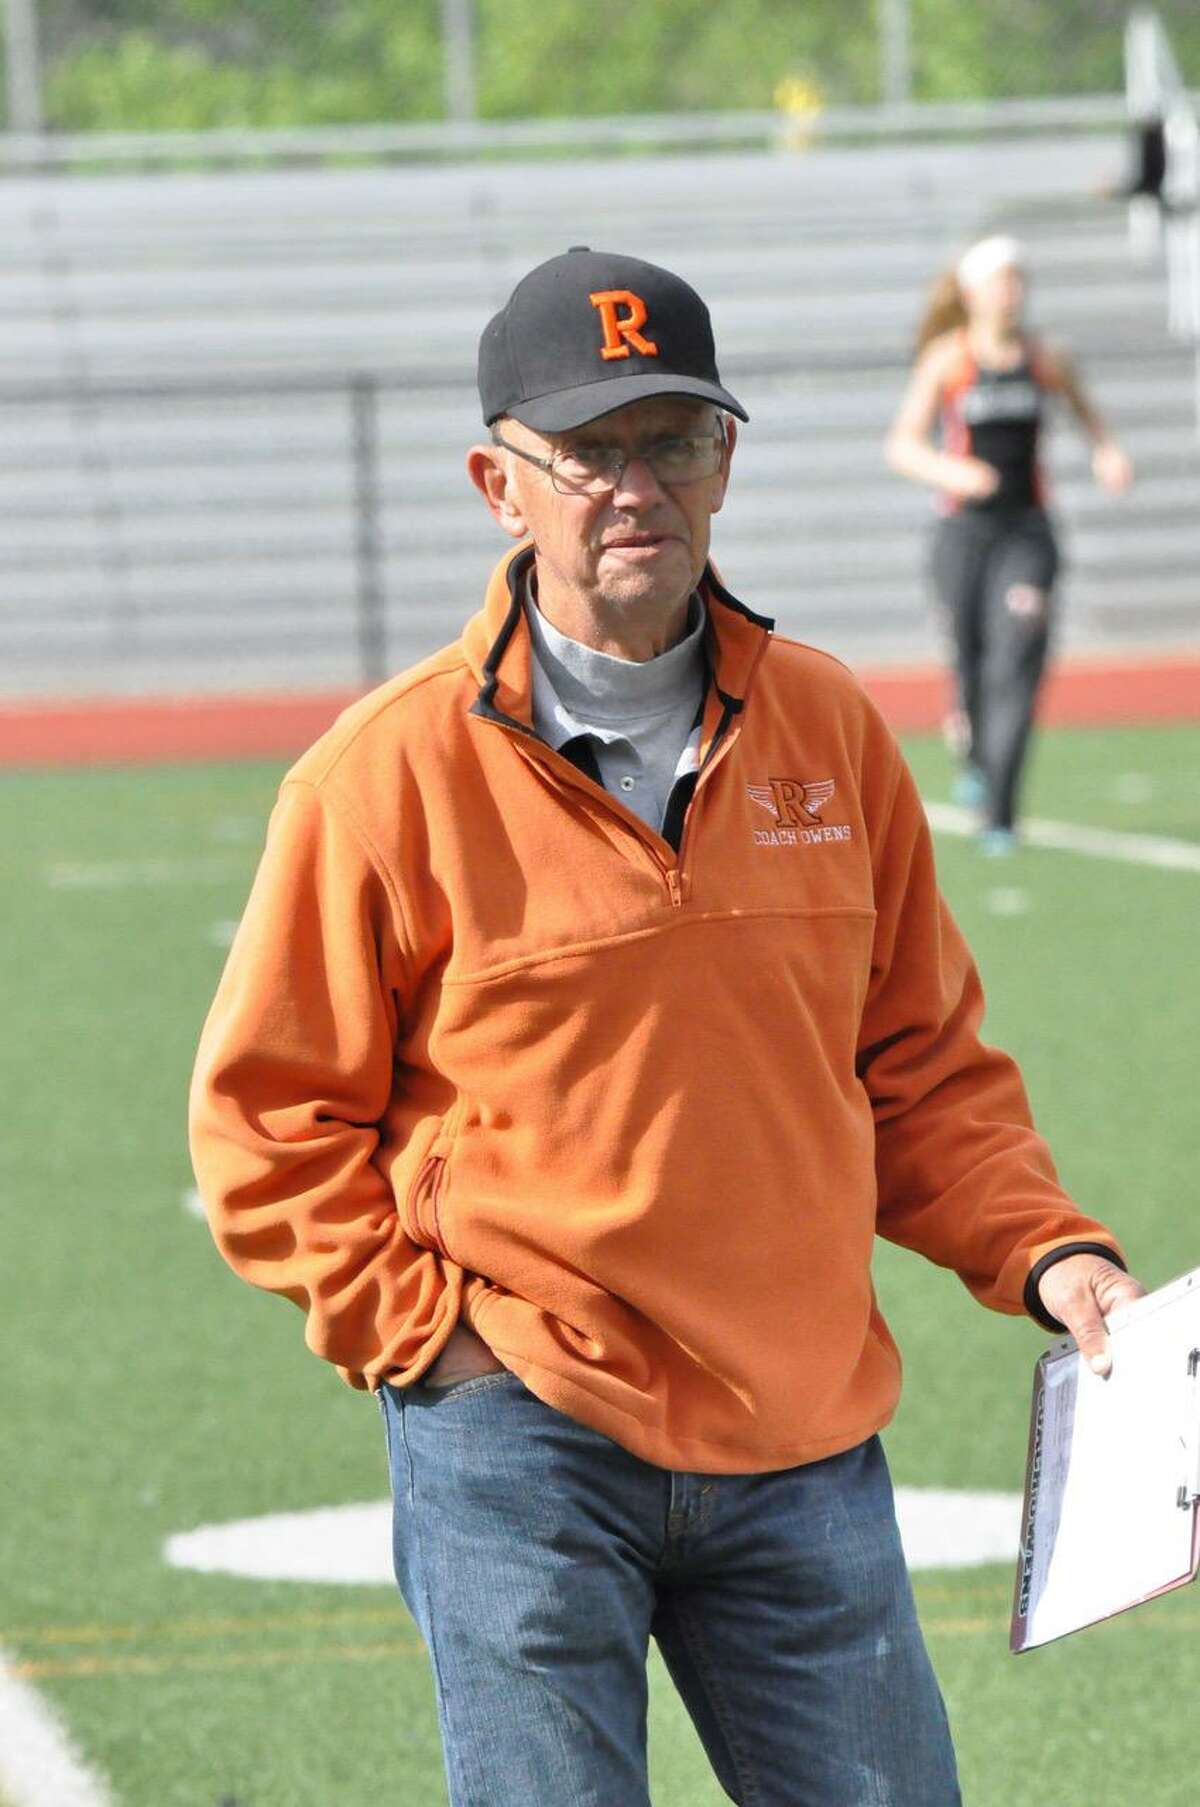 A virtual run-a-thon this Saturday will honor the memory of Bill Owens, a longtime assistant coach for the Ridgefield High girls cross country and track teams. Funds raised from the event will go to healthcare workers at local hospitals.